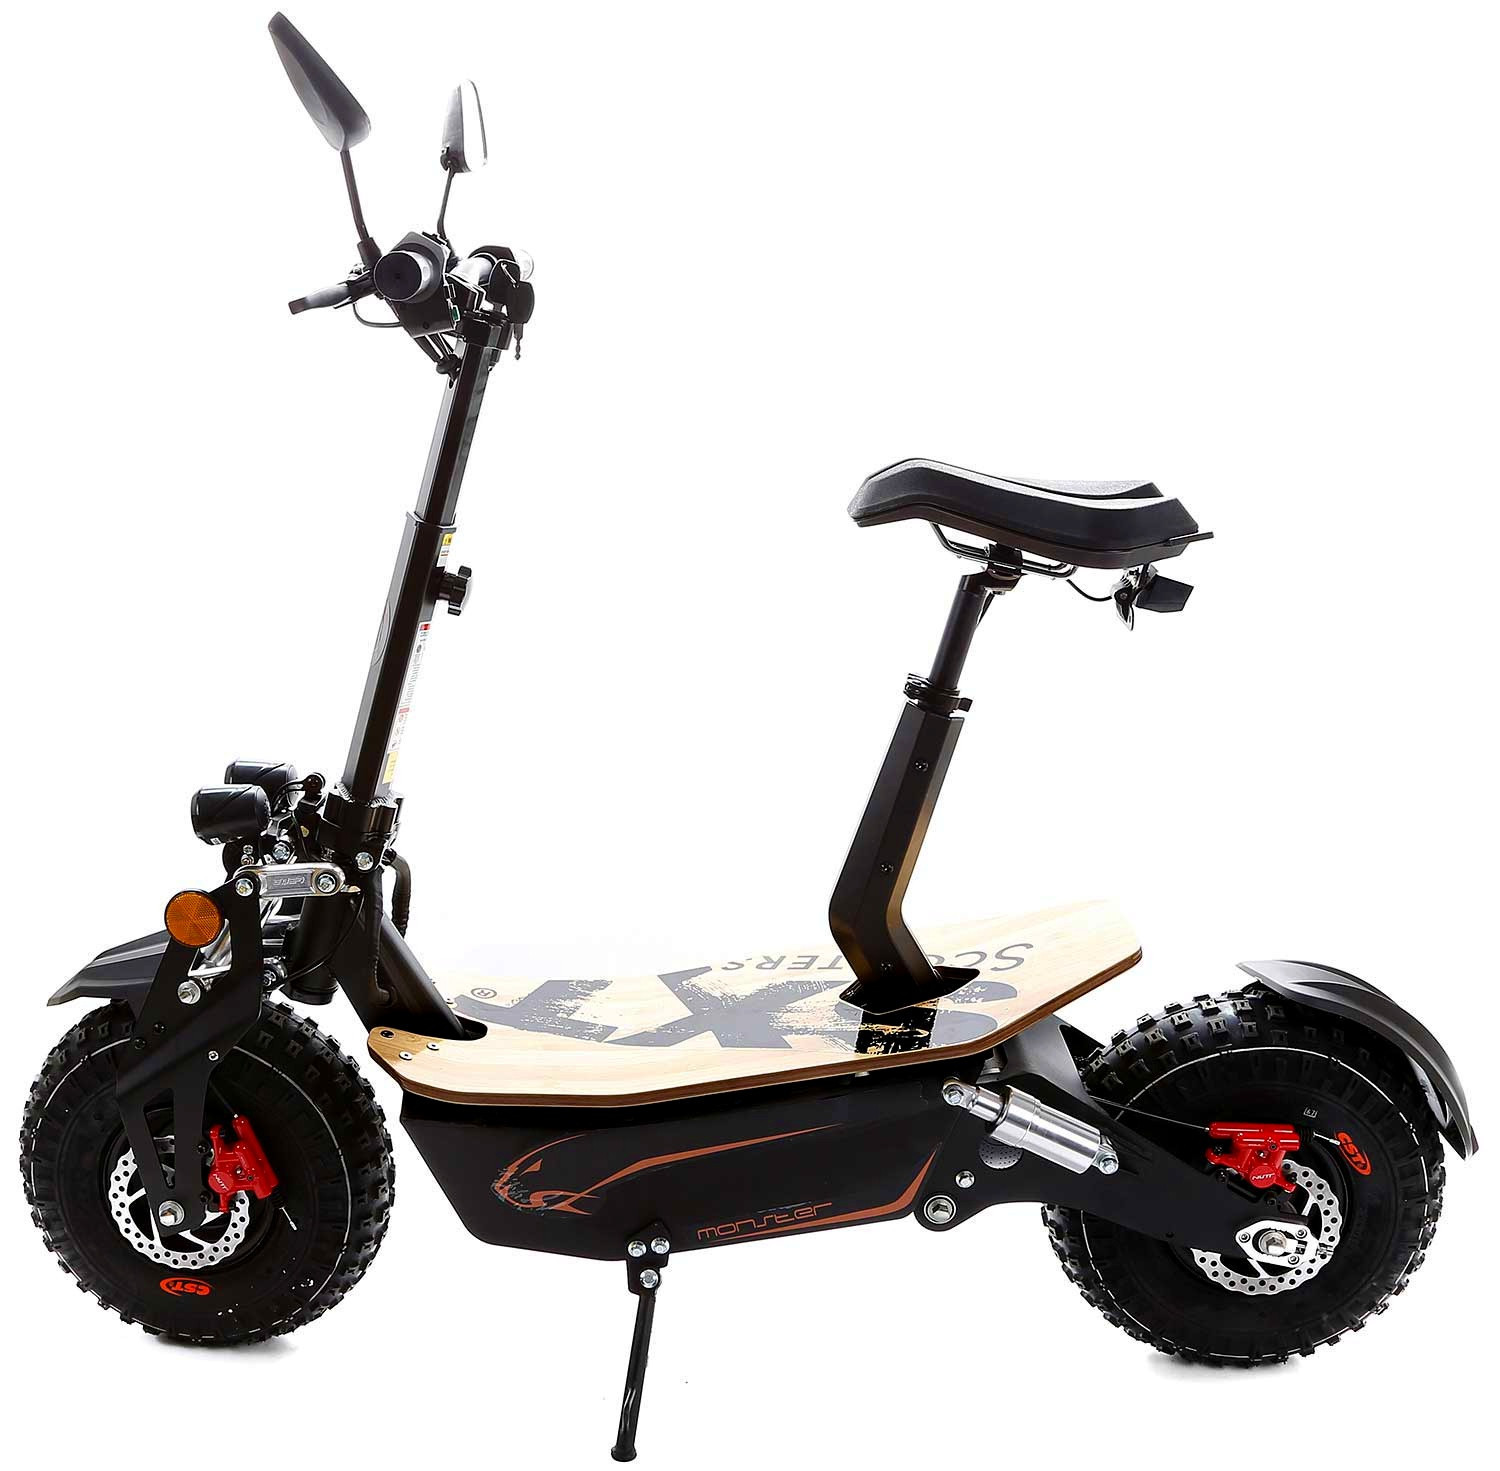 SXT Monster electric scooter in stock - Enjoy the ride